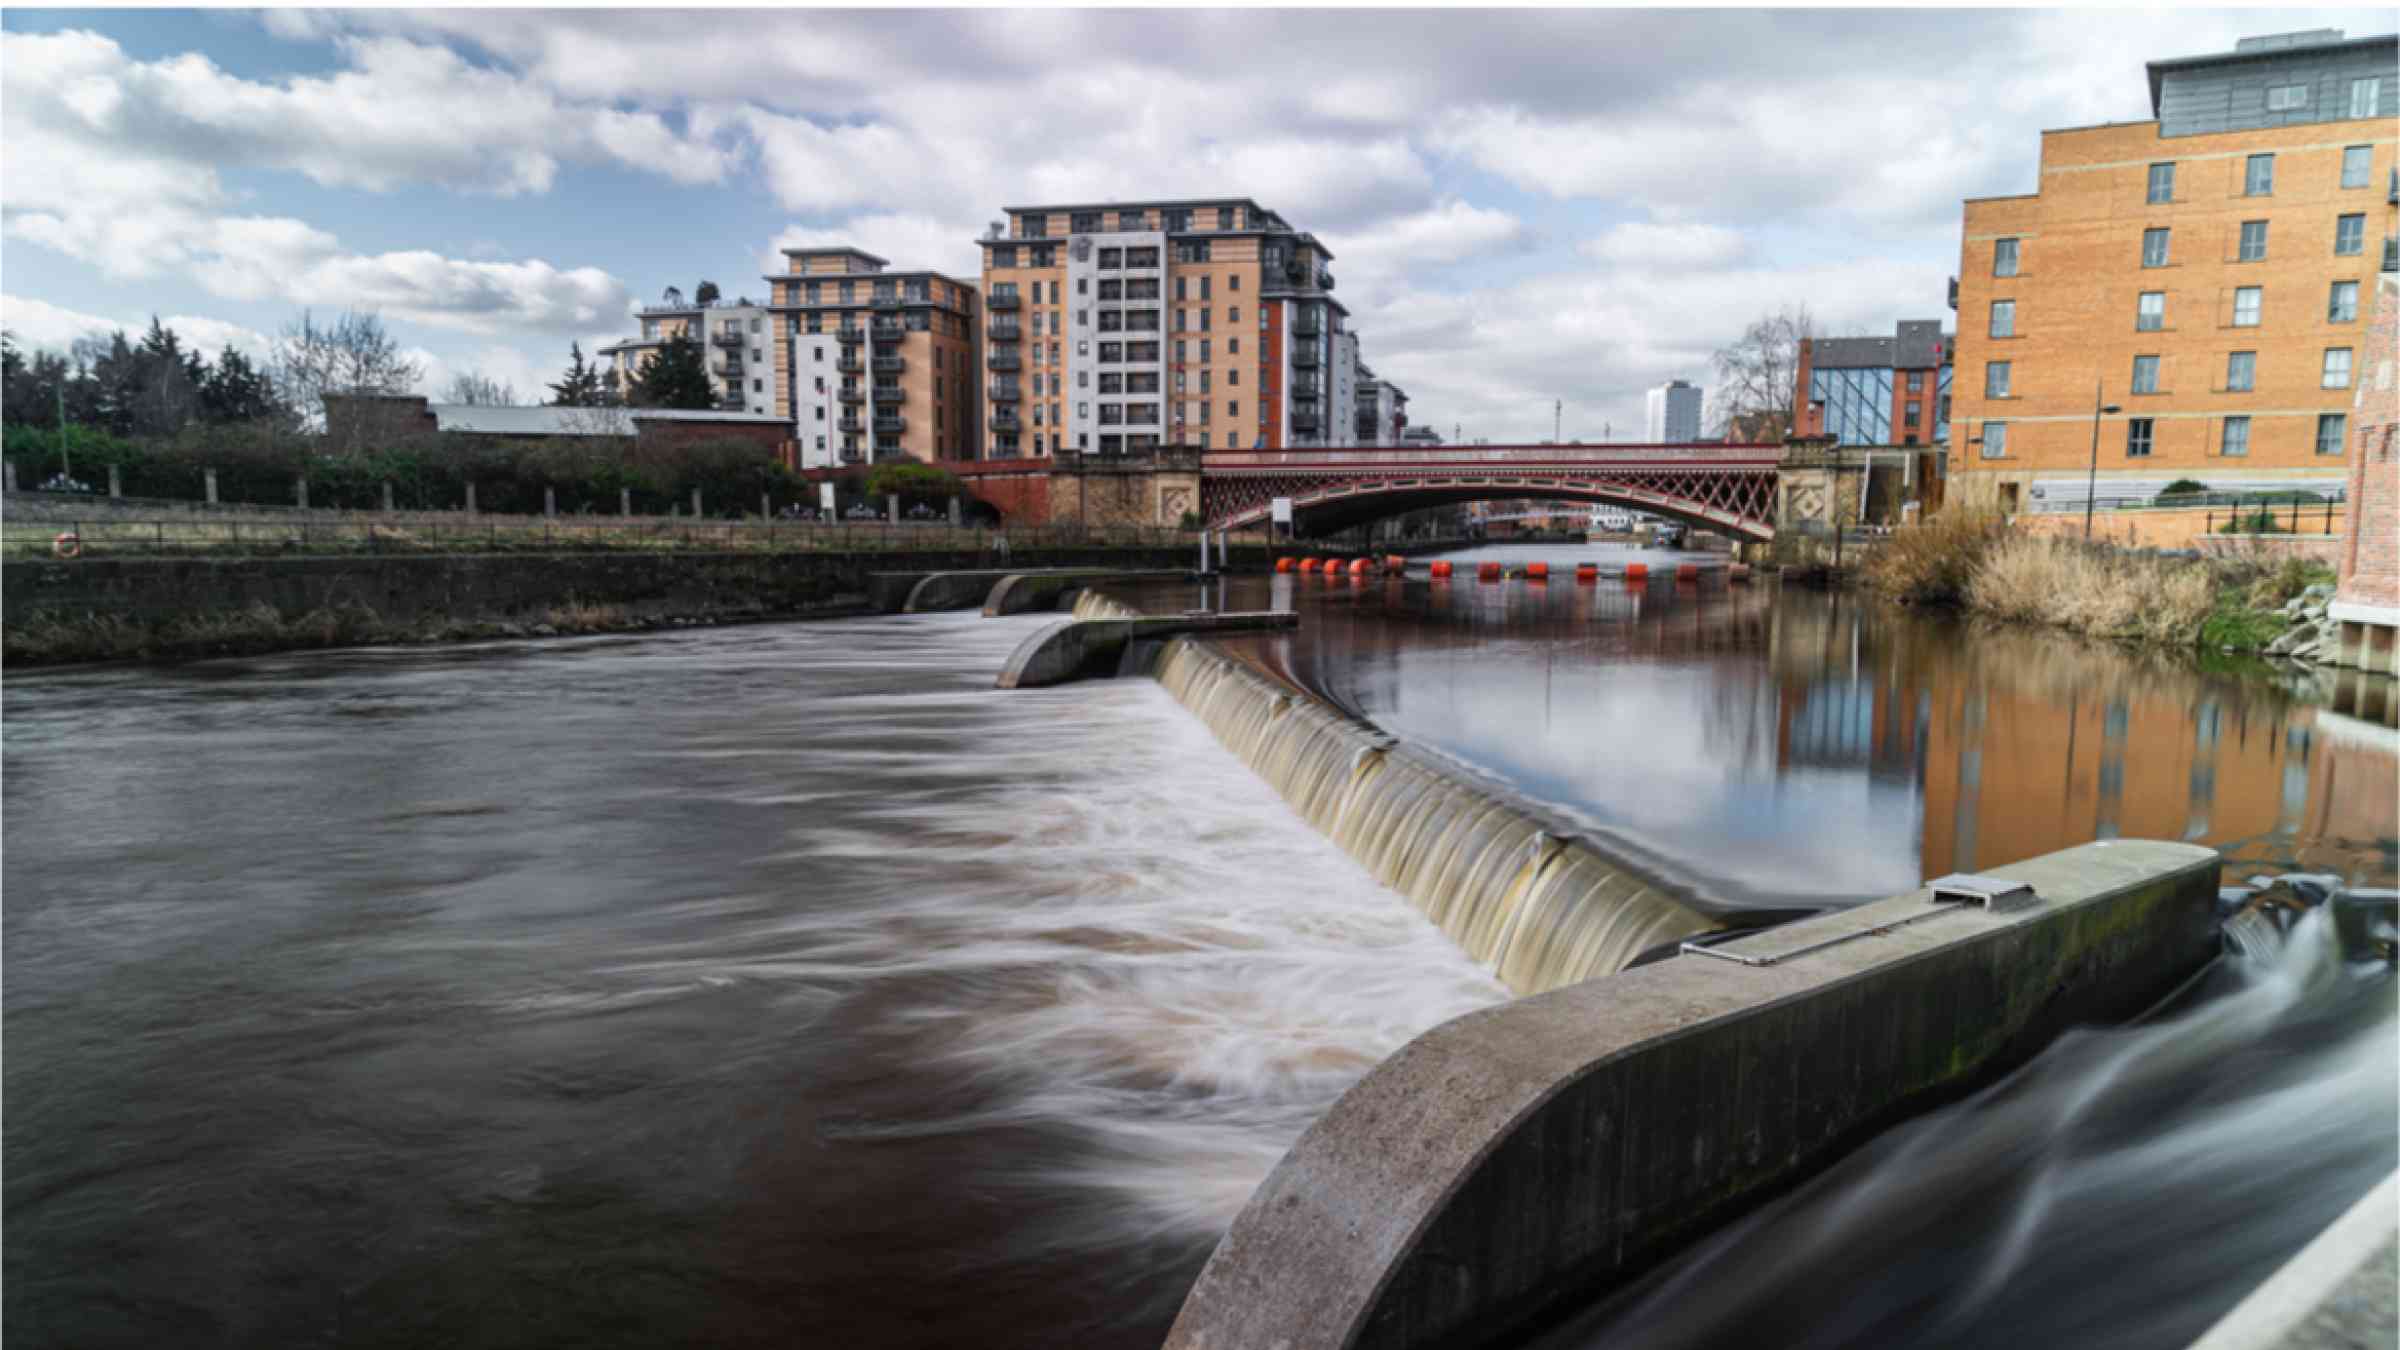 Long exposure of crown point weir in the city center of Leeds which was built as part of the Leeds flood control program.